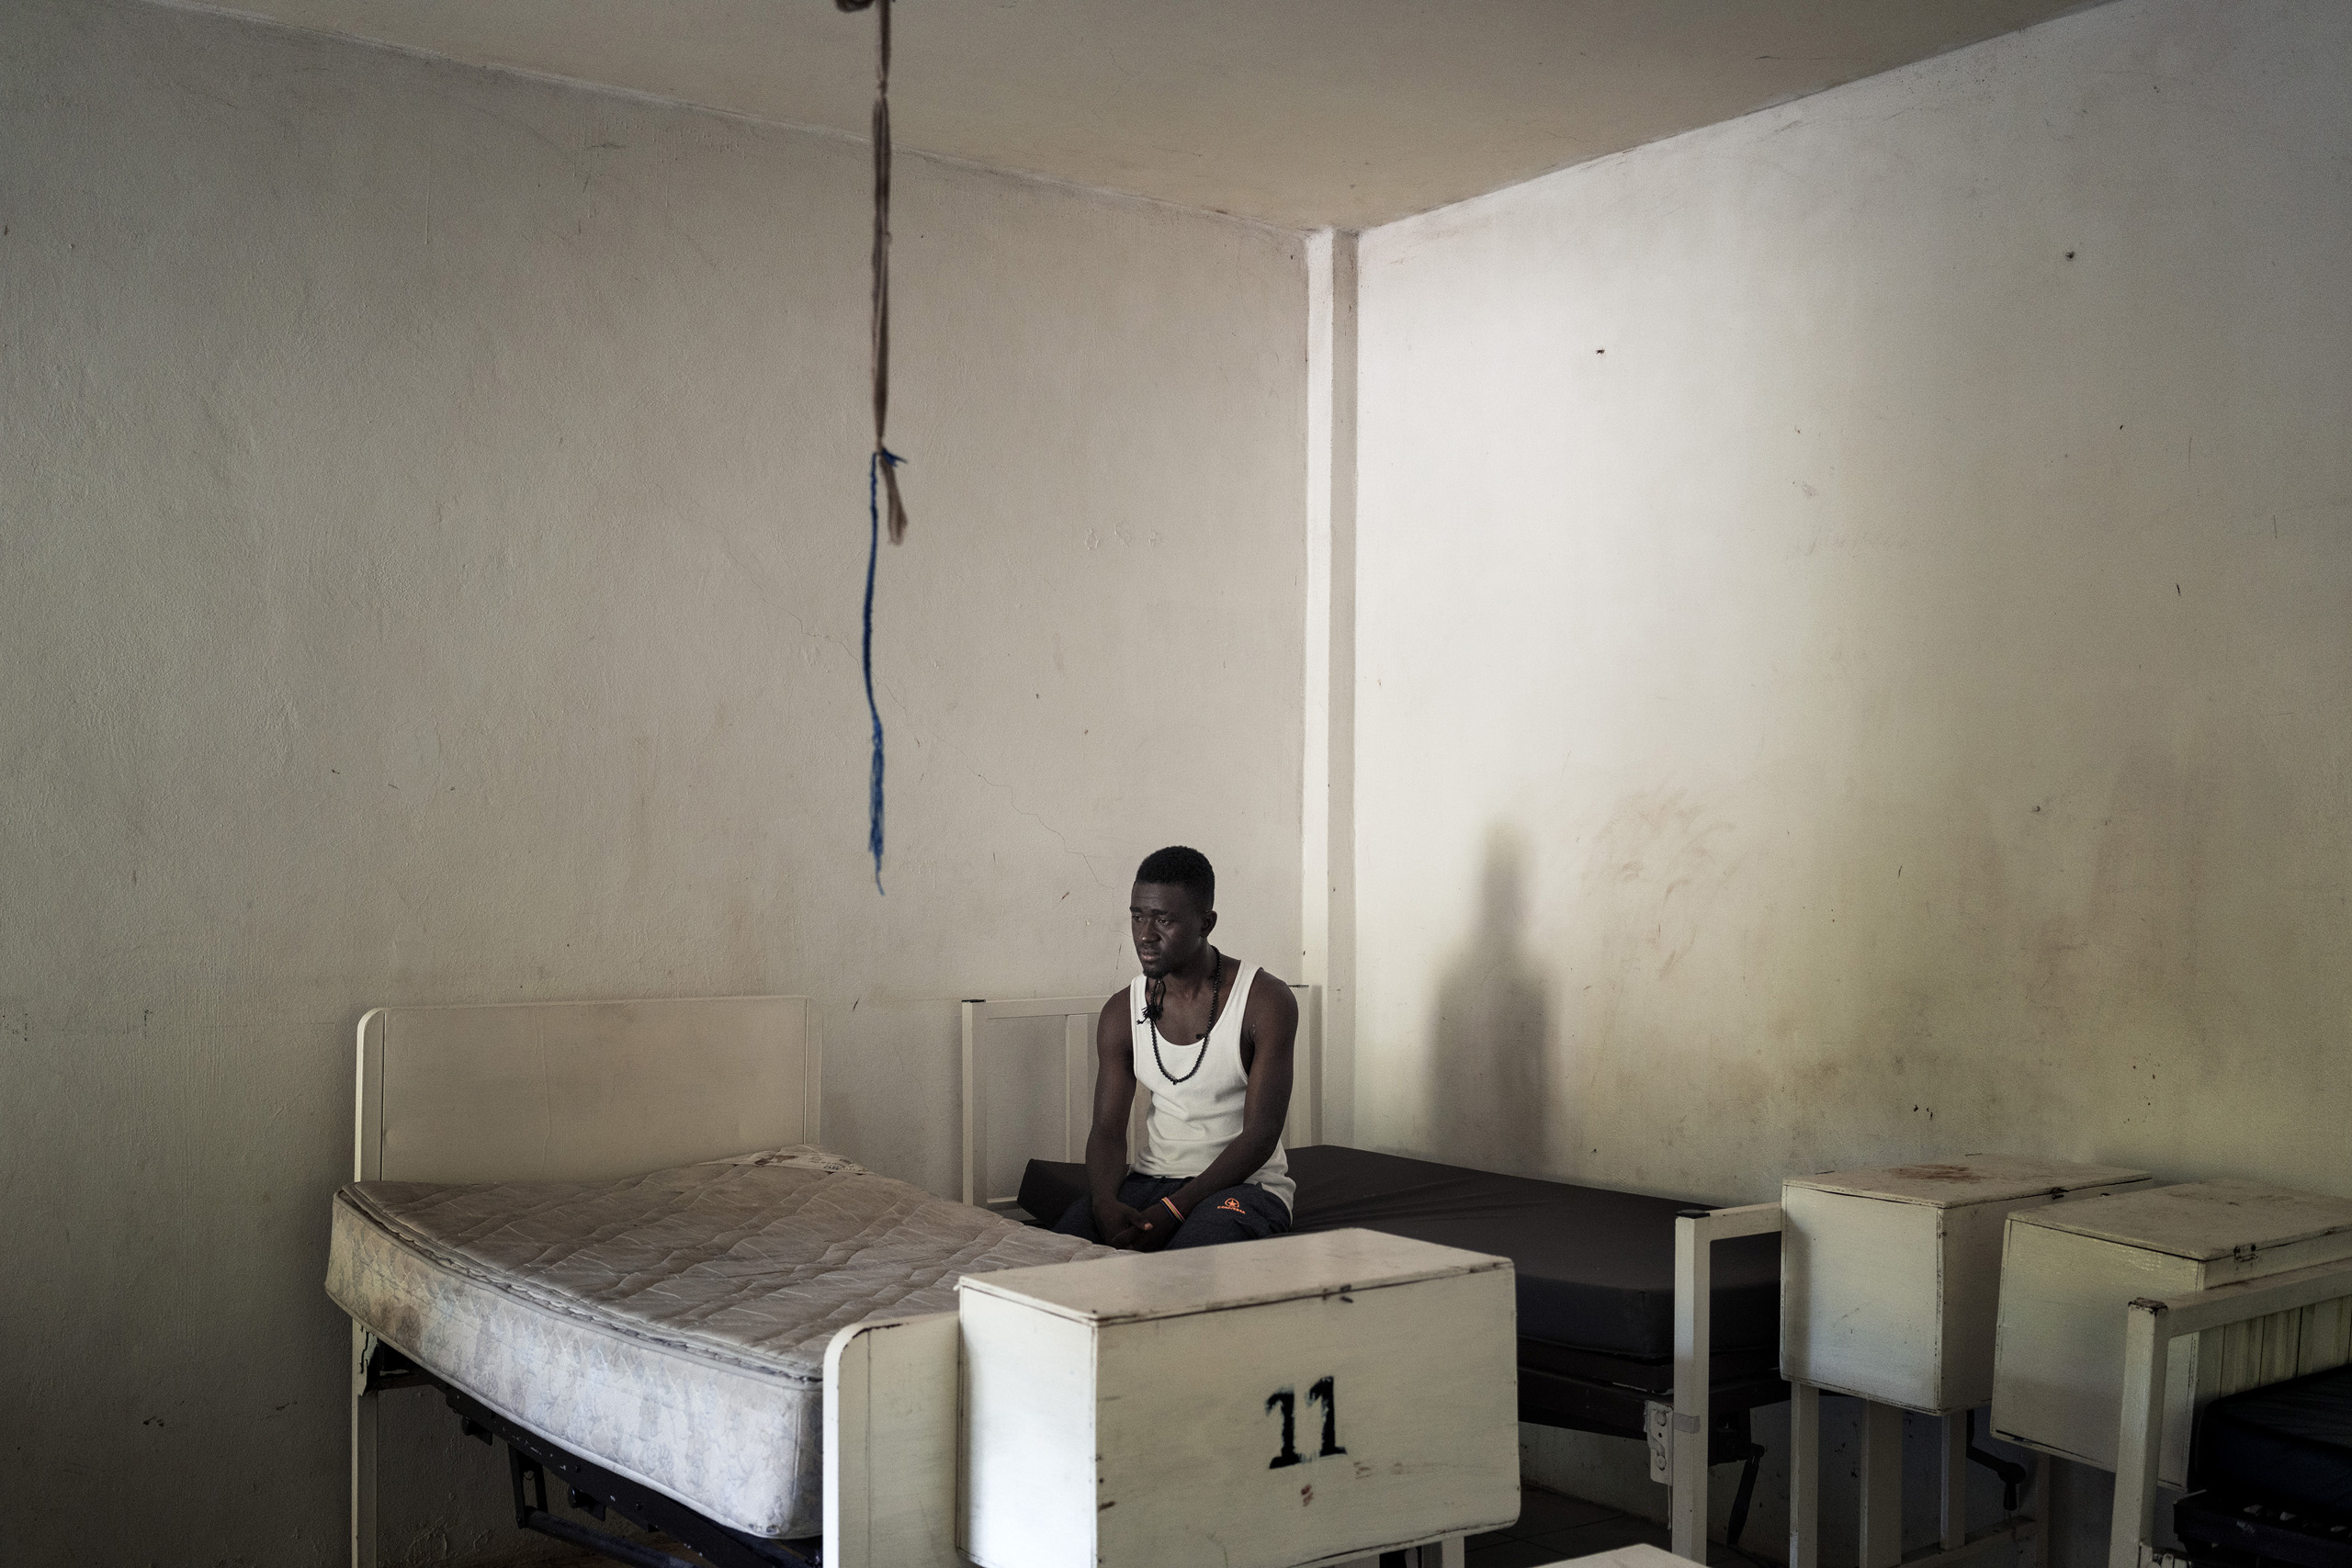 An illegal immigrant from Congo in the Tapachula migrant's home rests after a long journey by land from Brazil. He is preparing to take the bus for a three-day trip that will take him to Tijuana. Tapachula, Chiapas, Mexico. Sept. 26, 2016.